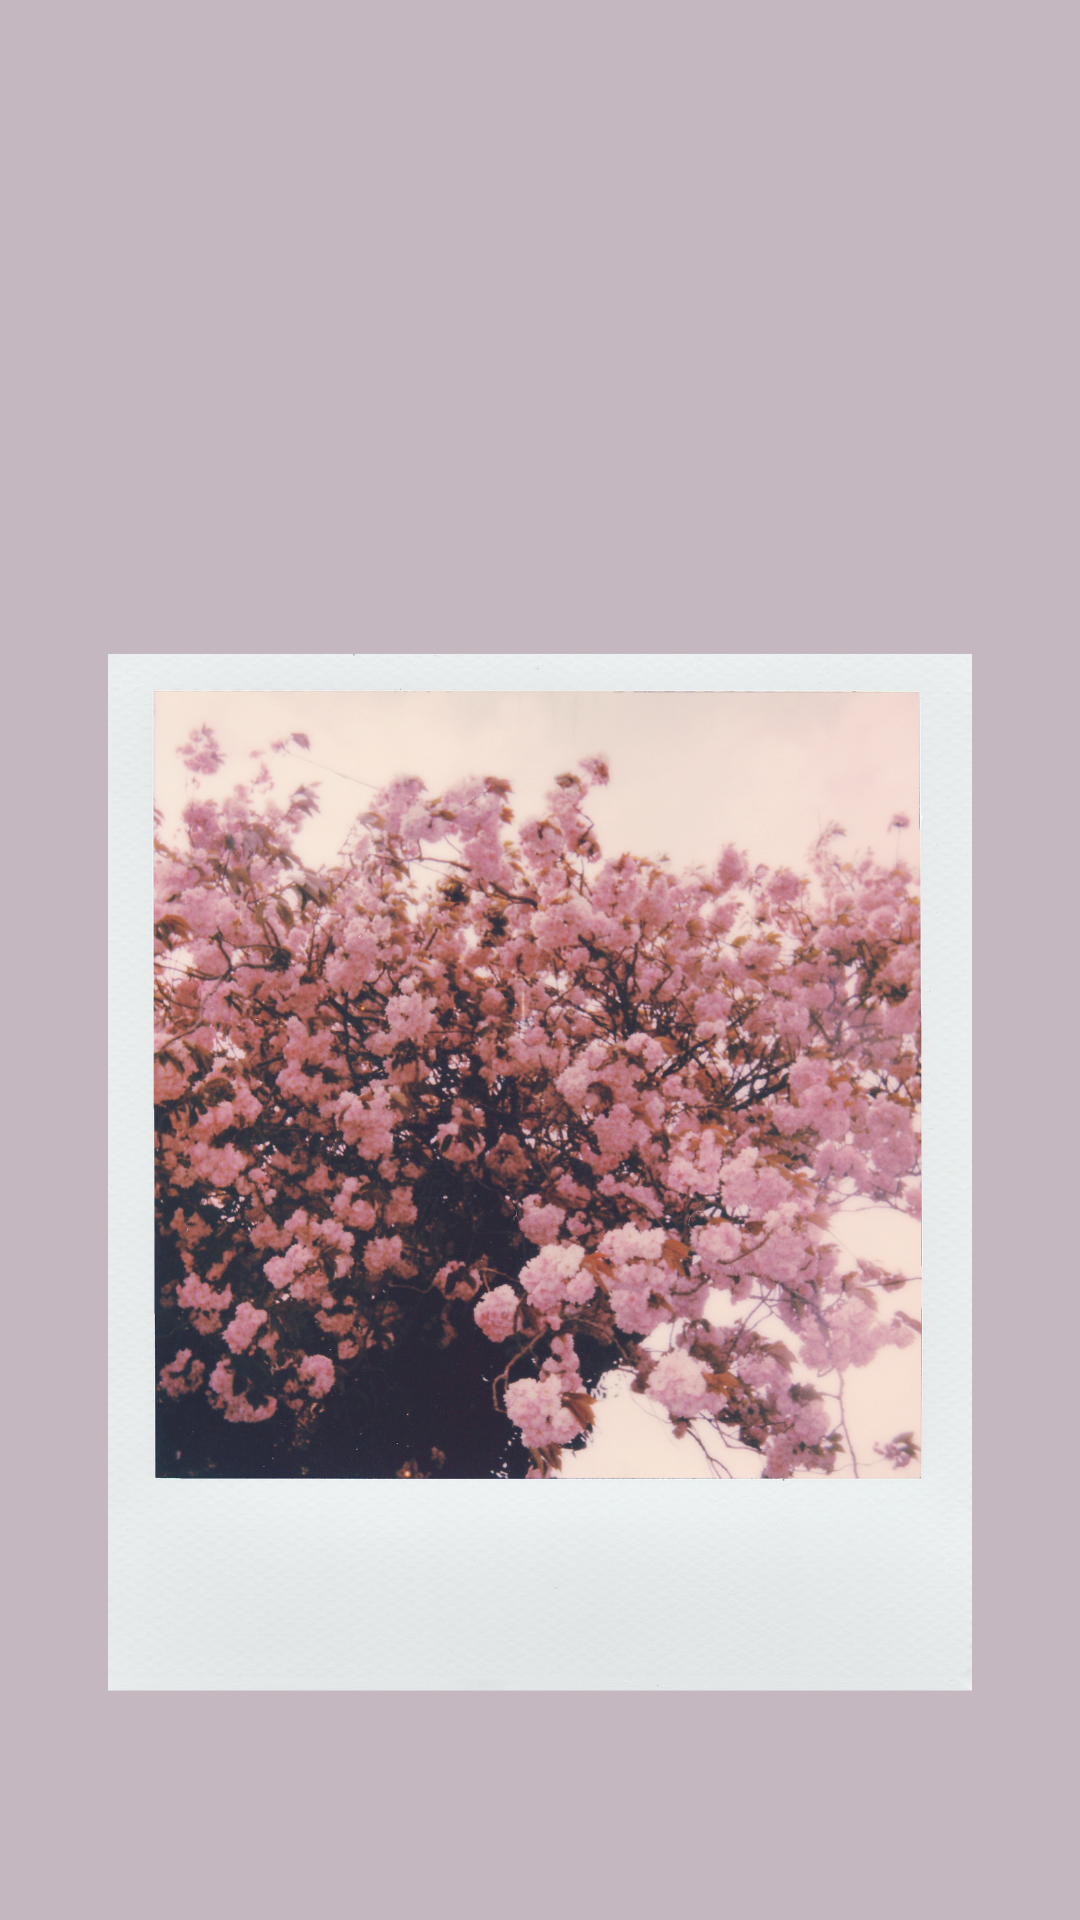 Free Aesthetic Phone Wallpapers for Spring